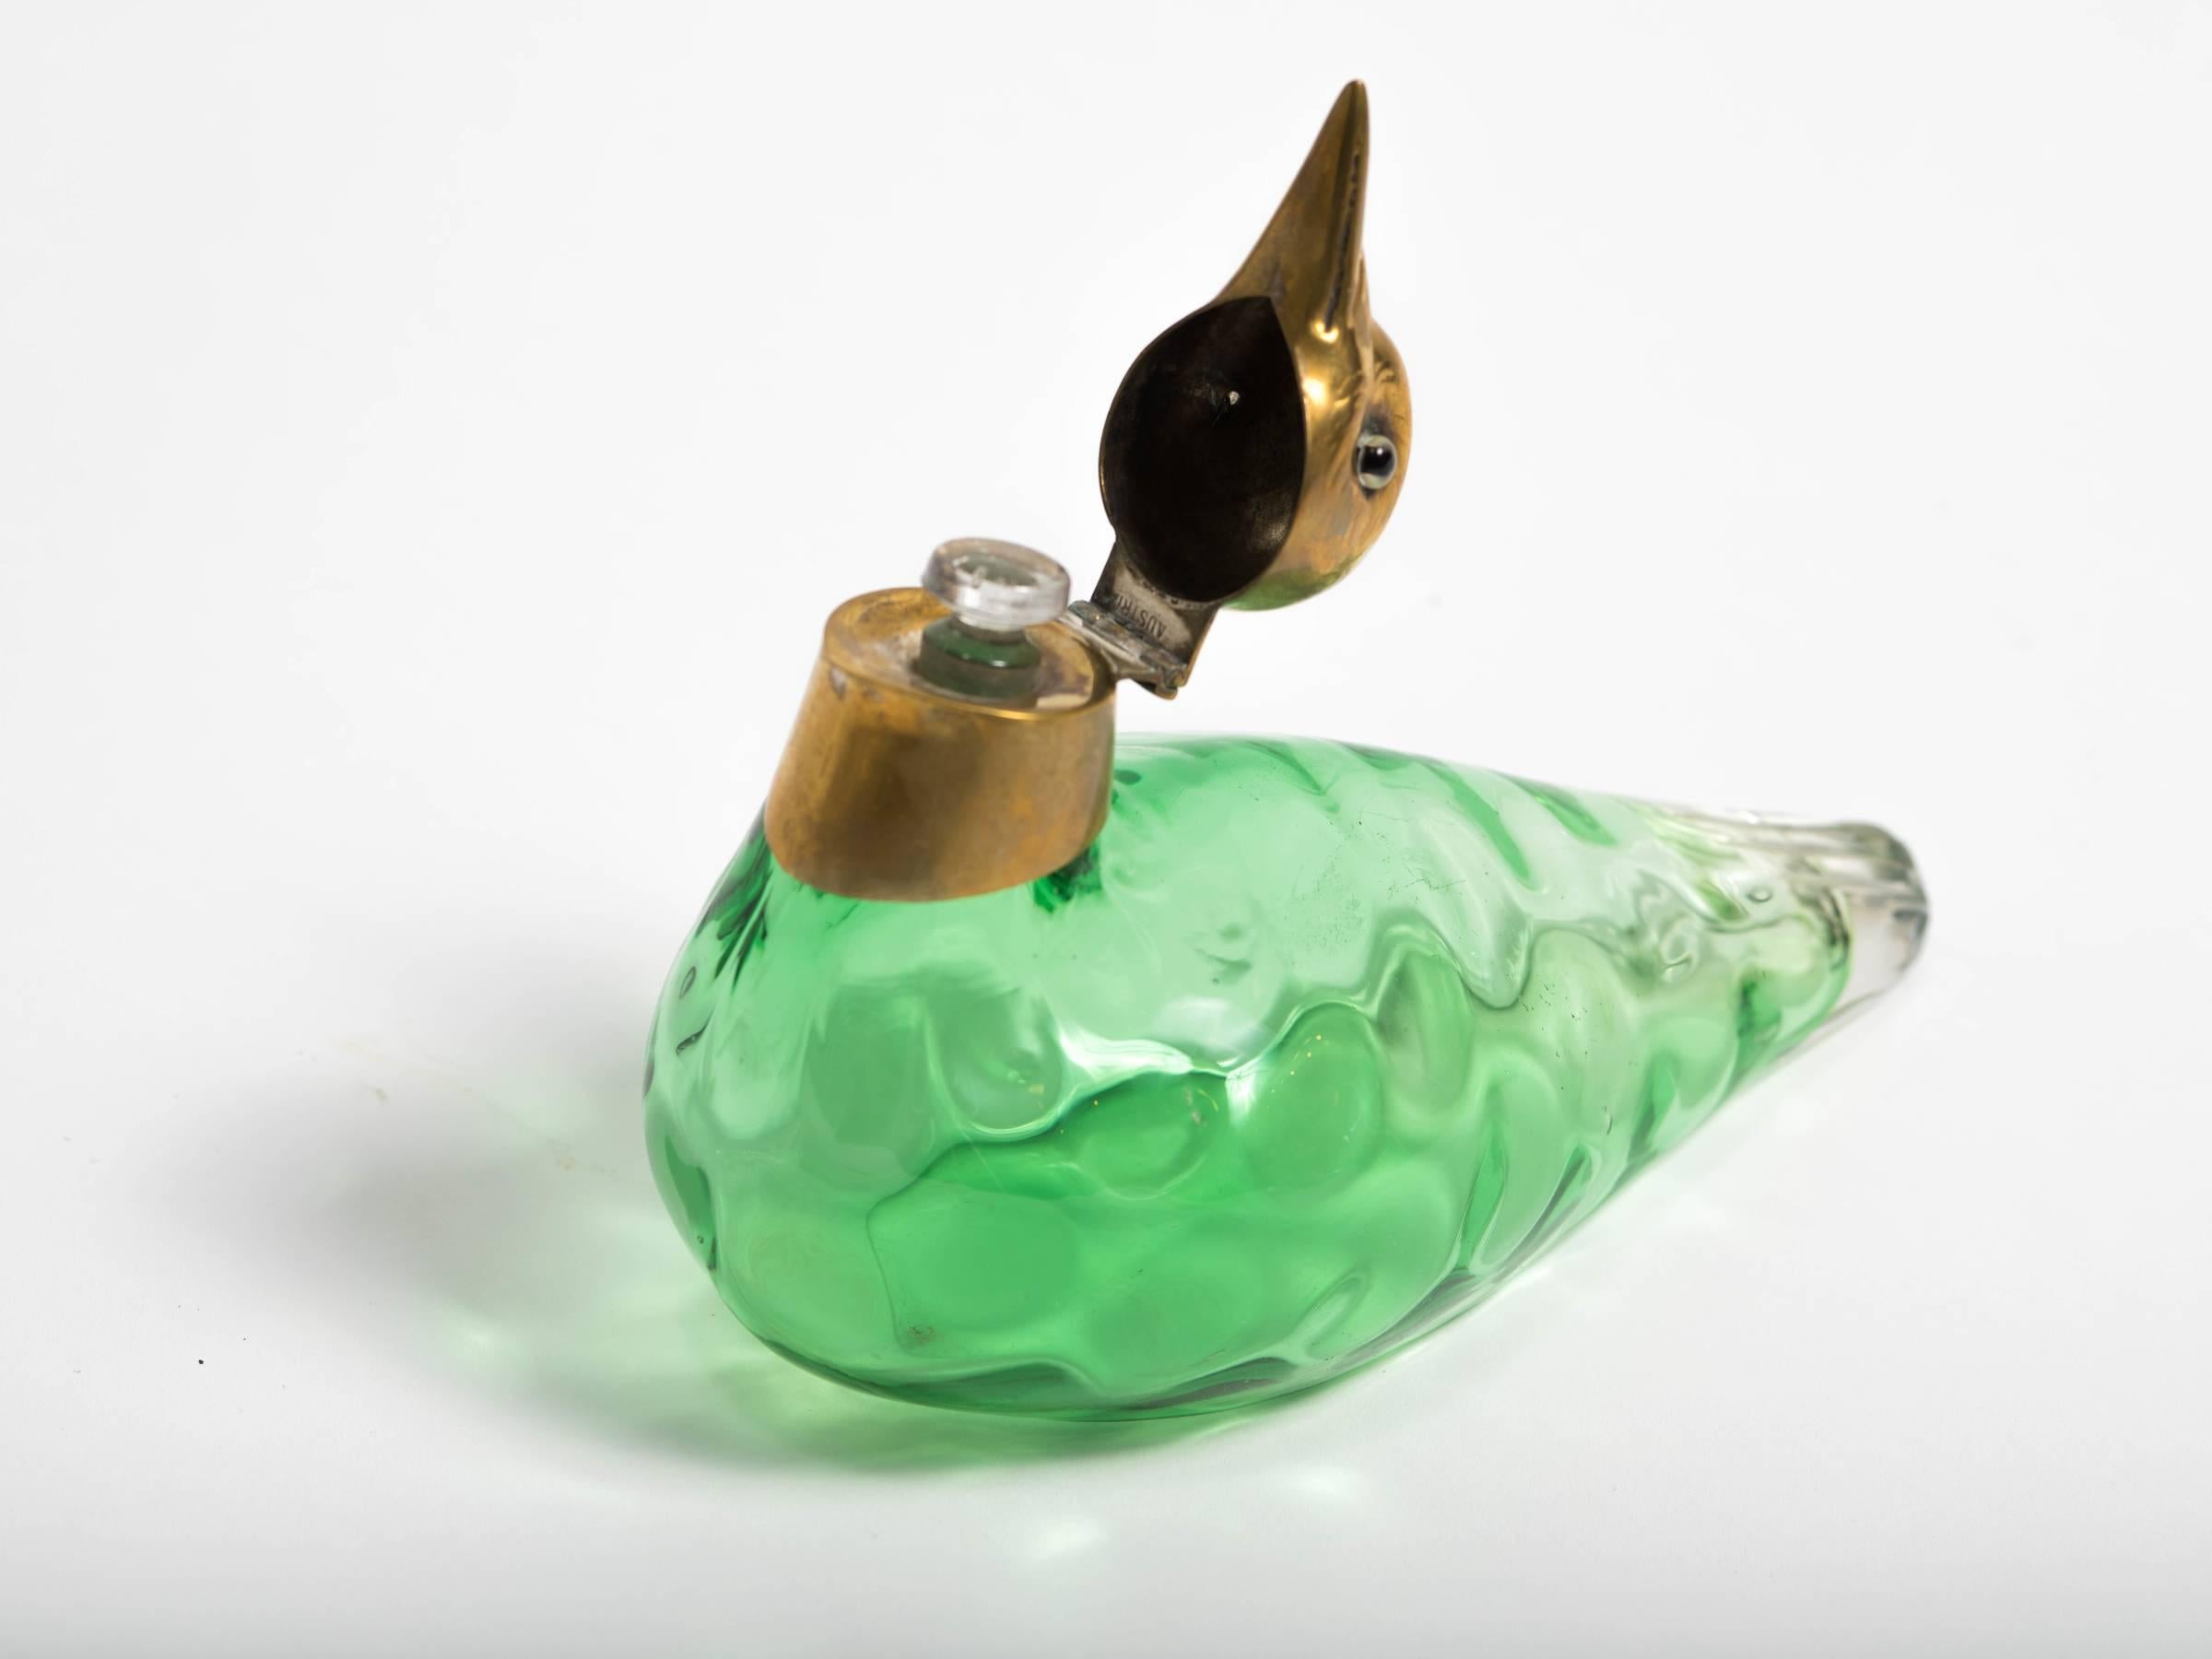 Austrian Perfume Bottle in the Form of a Bird 1